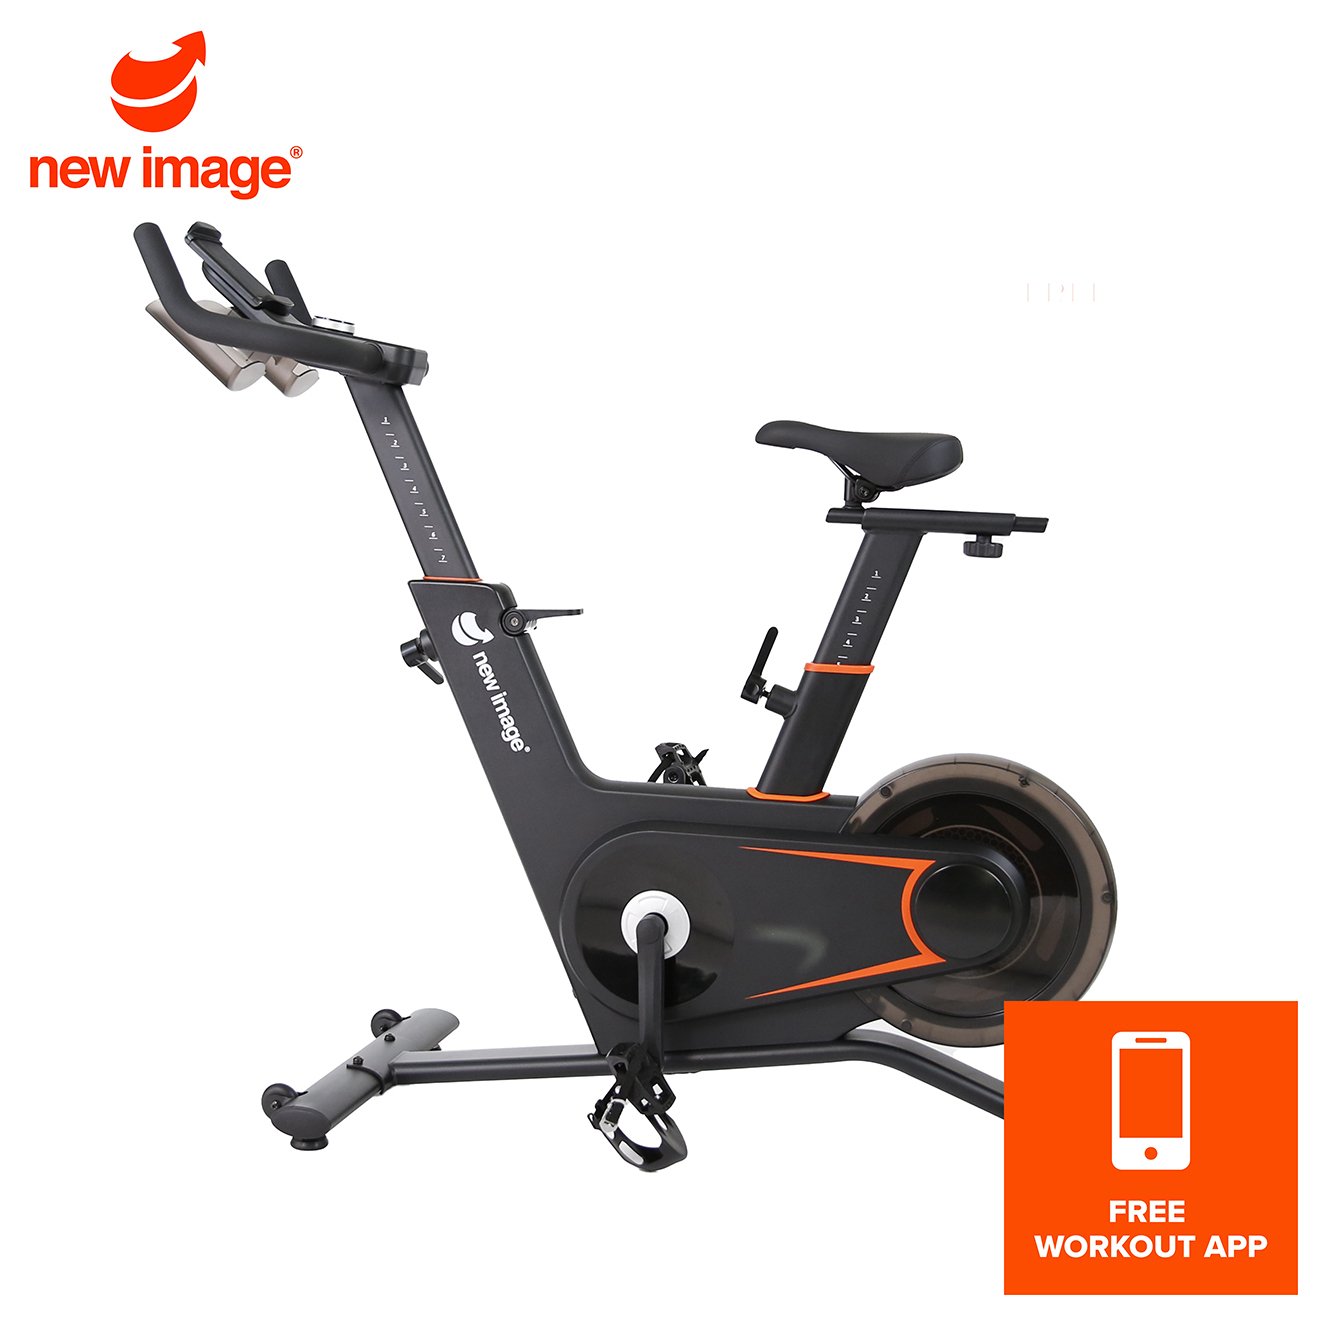 FITT Rider – Professional Indoor Exercise Bike by New Image